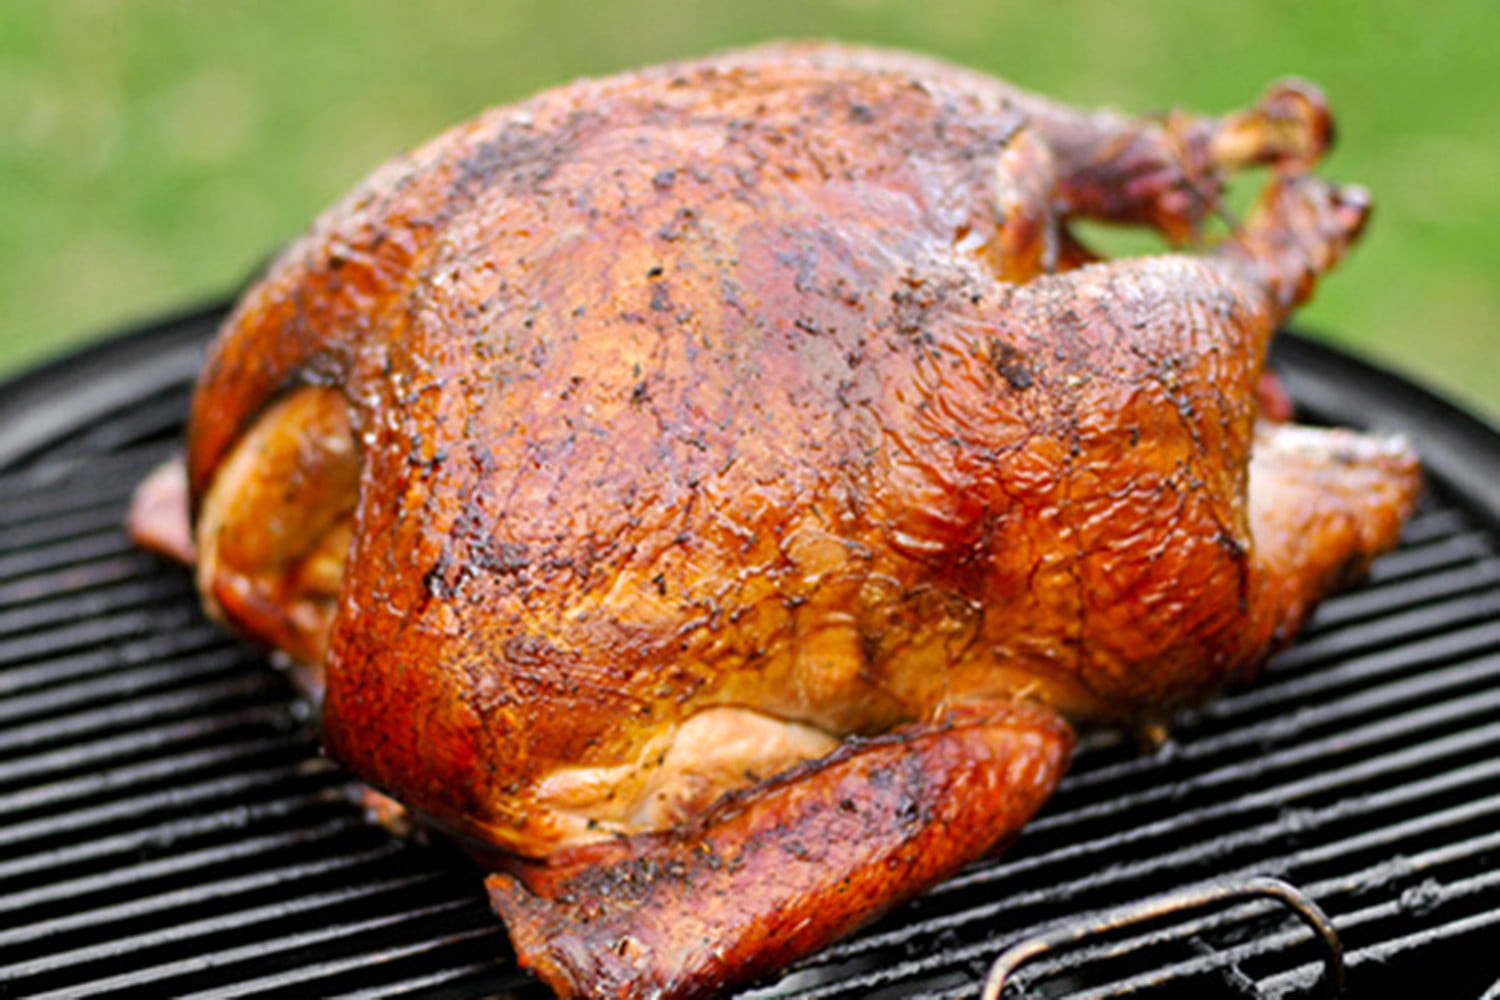 Cooked Thanksgiving Turkey
 How to Cook a Thanksgiving Turkey Without an Oven